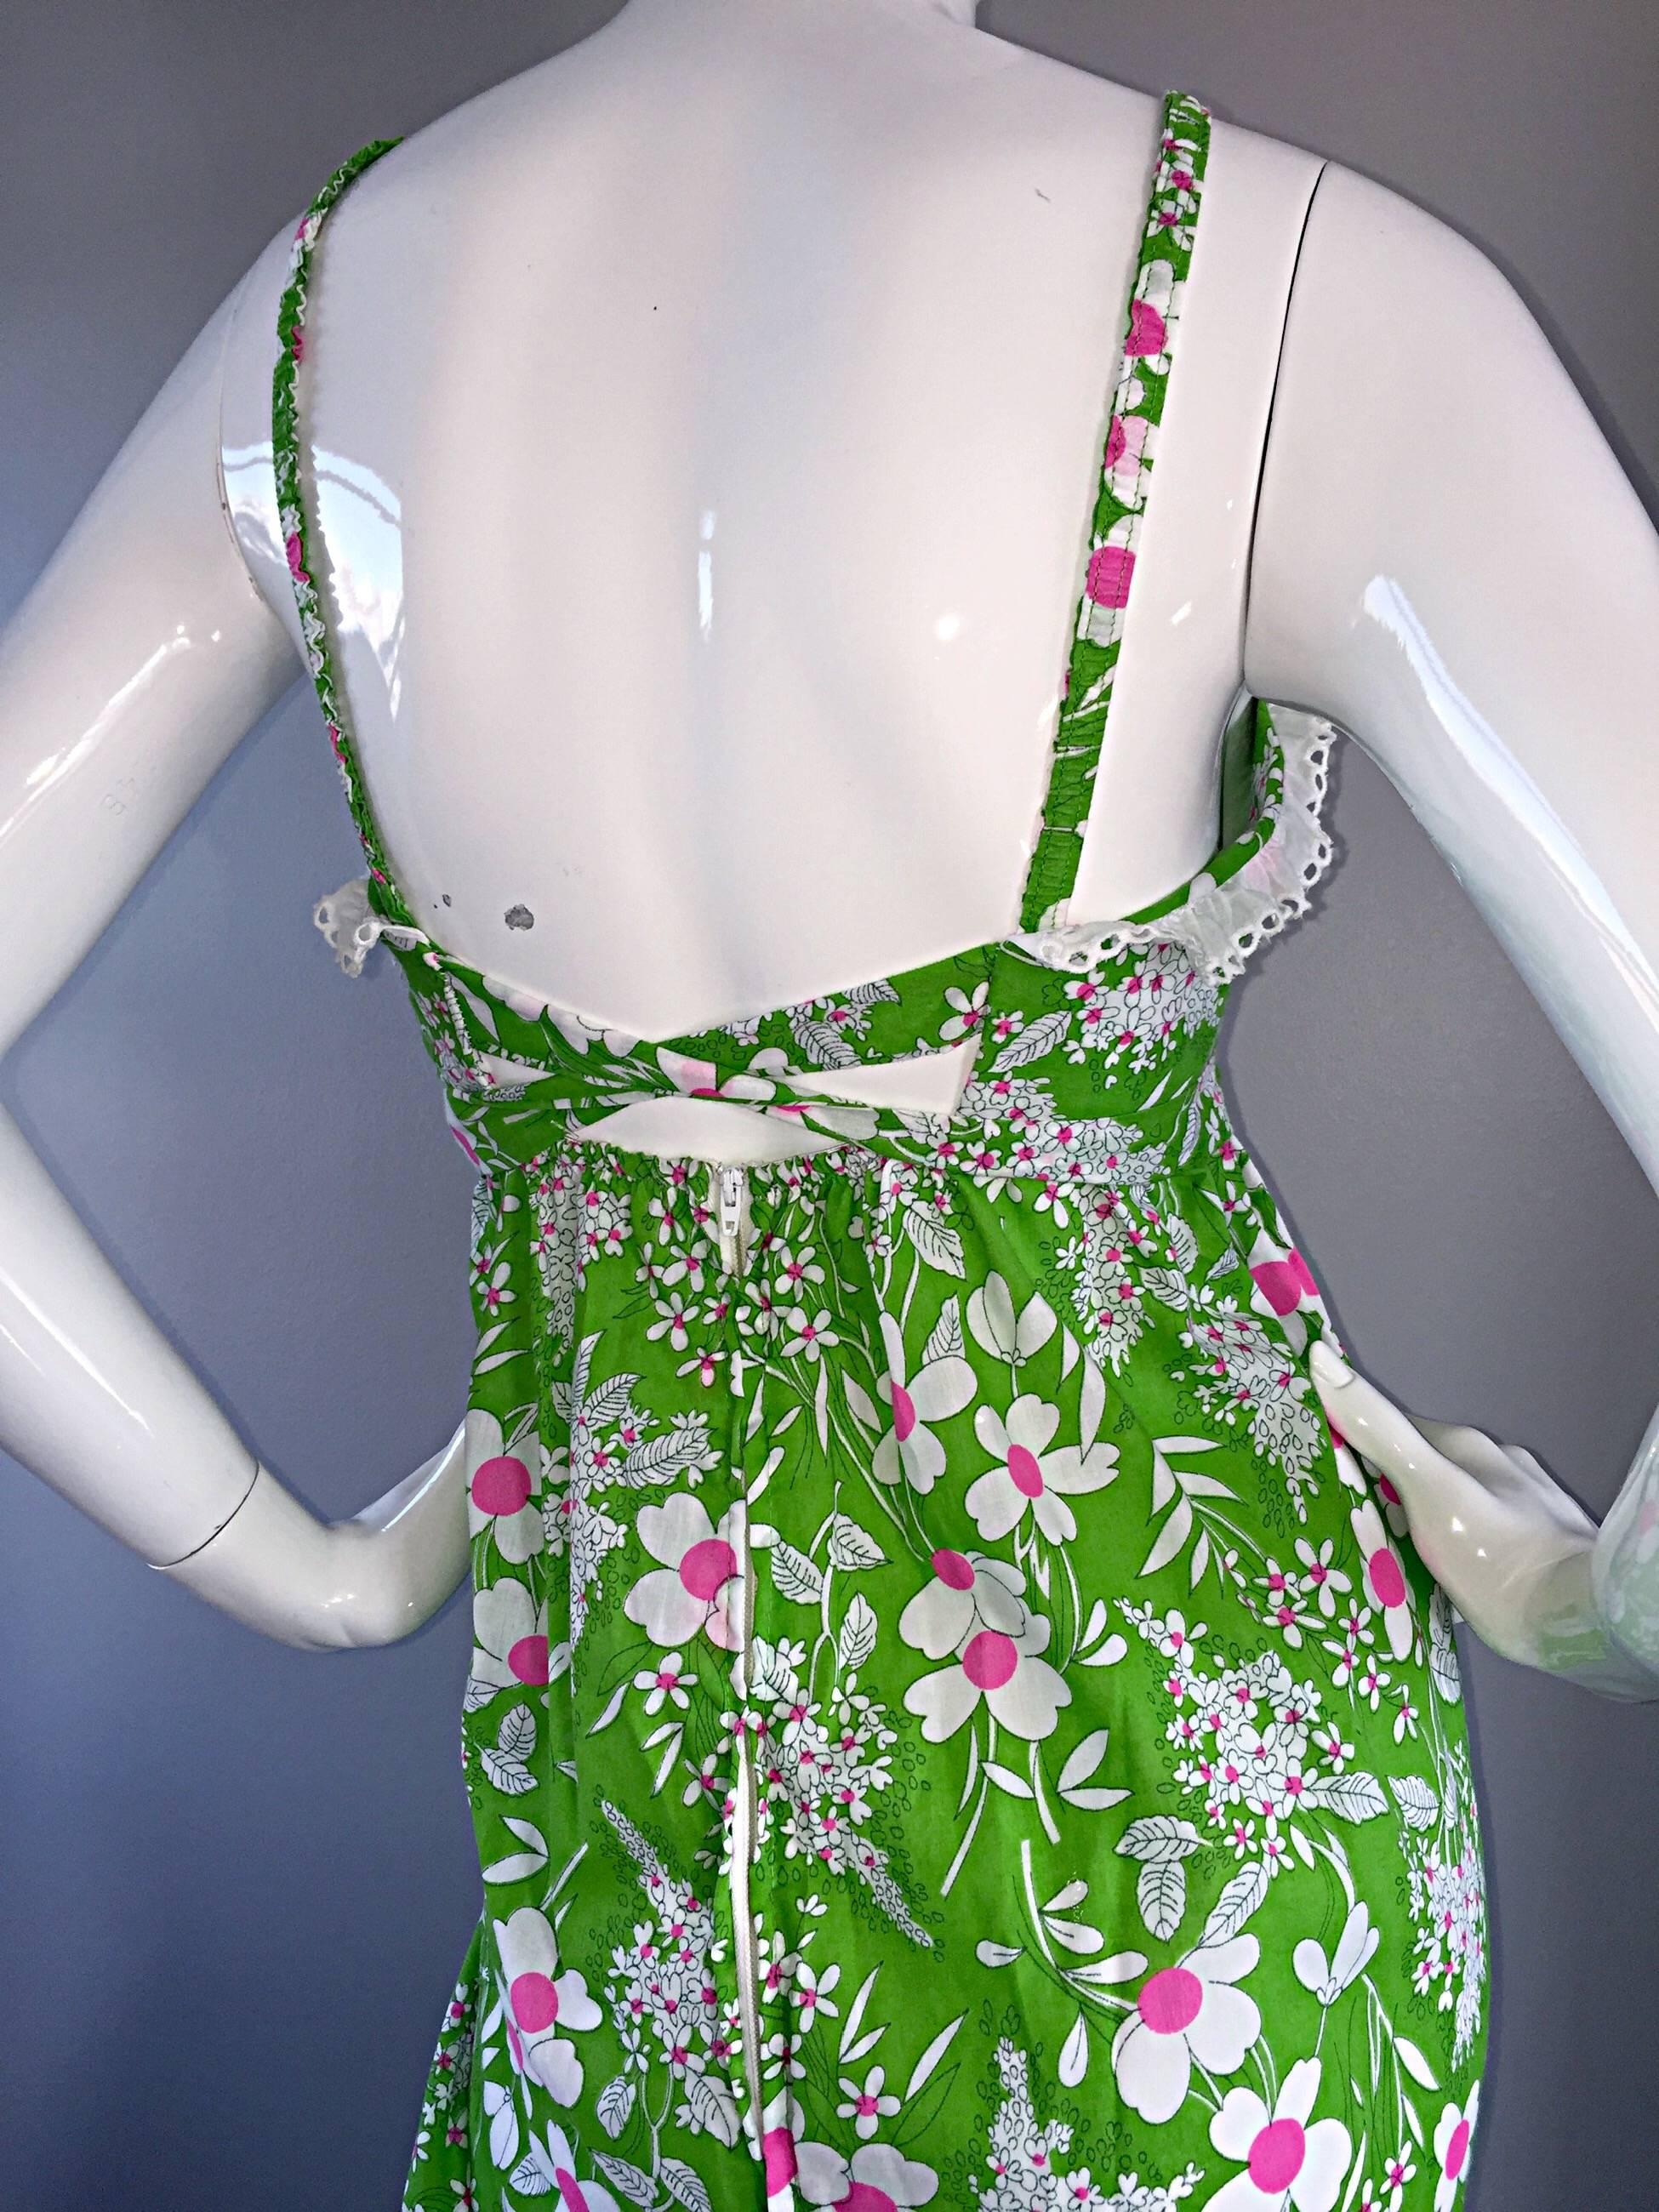 Women's Amazing Vintage 1970s 70s Jumpsuit In Neon Green + Pink + White w/ Flowers Lace For Sale